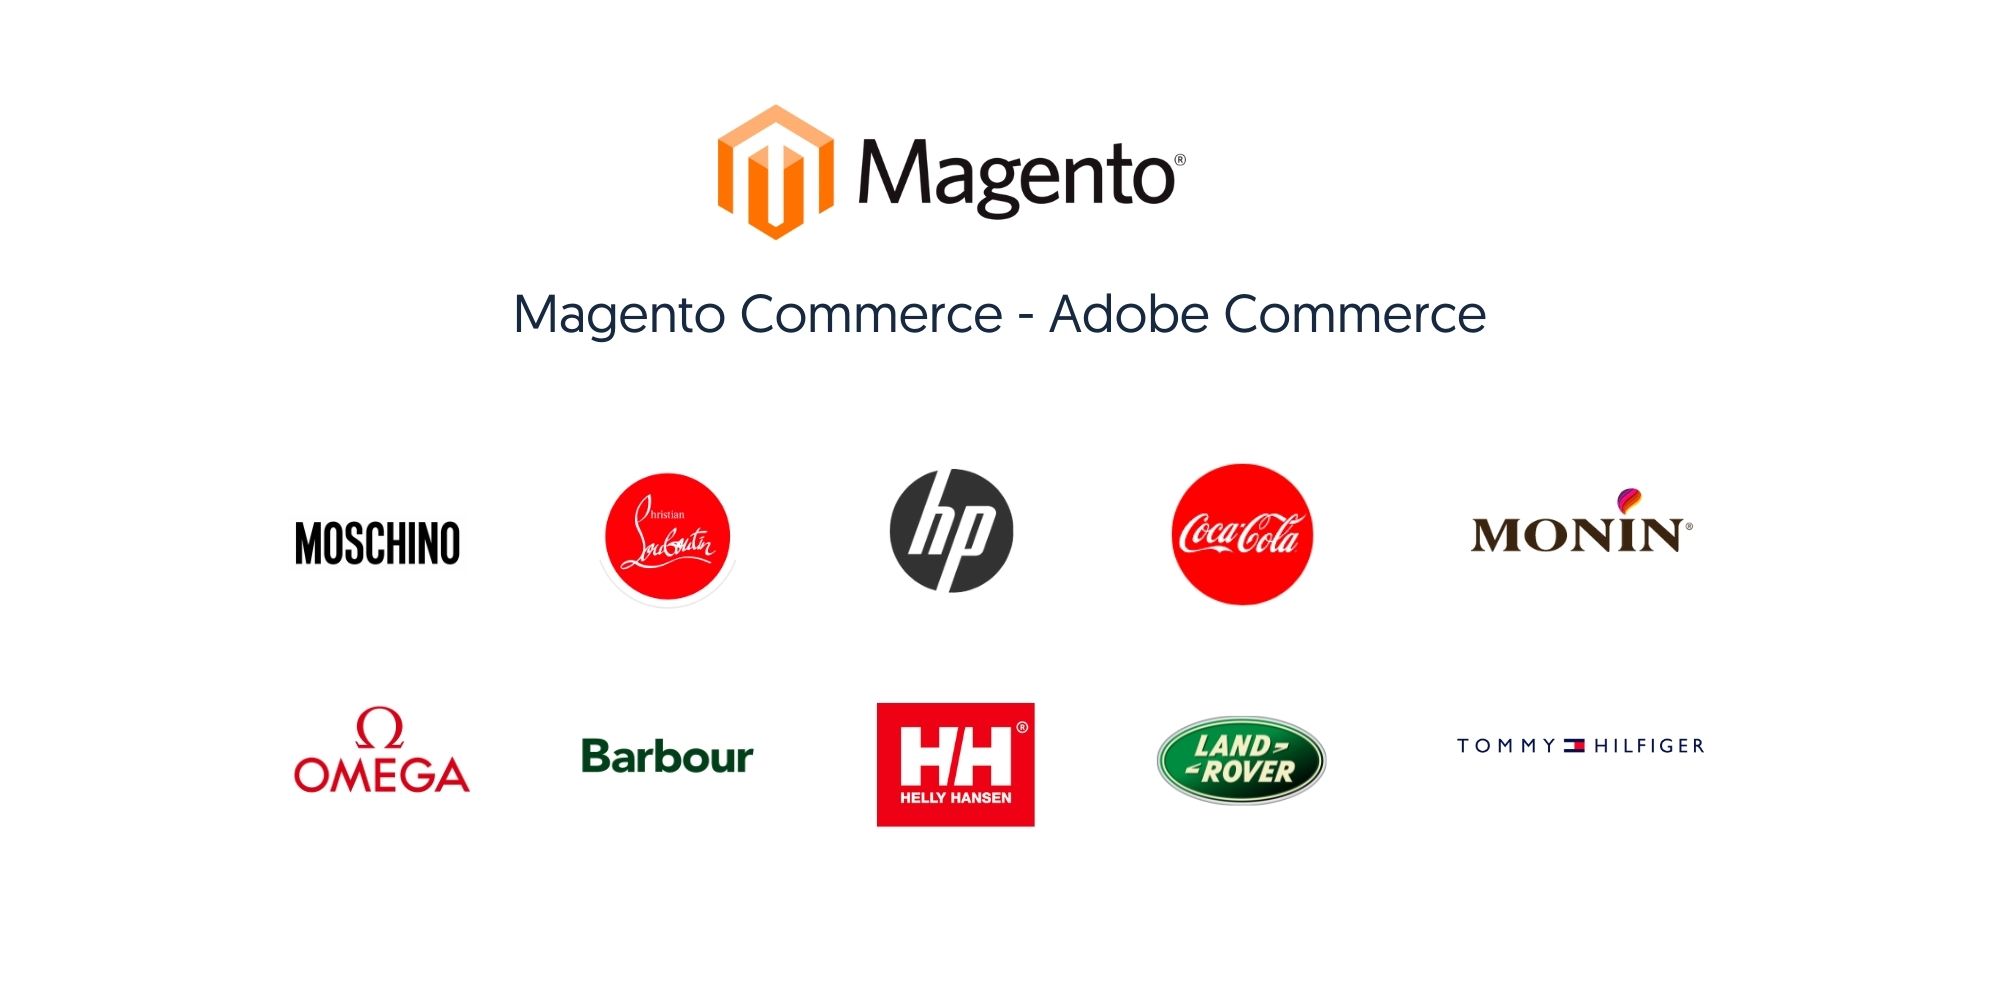 magento commerce examples